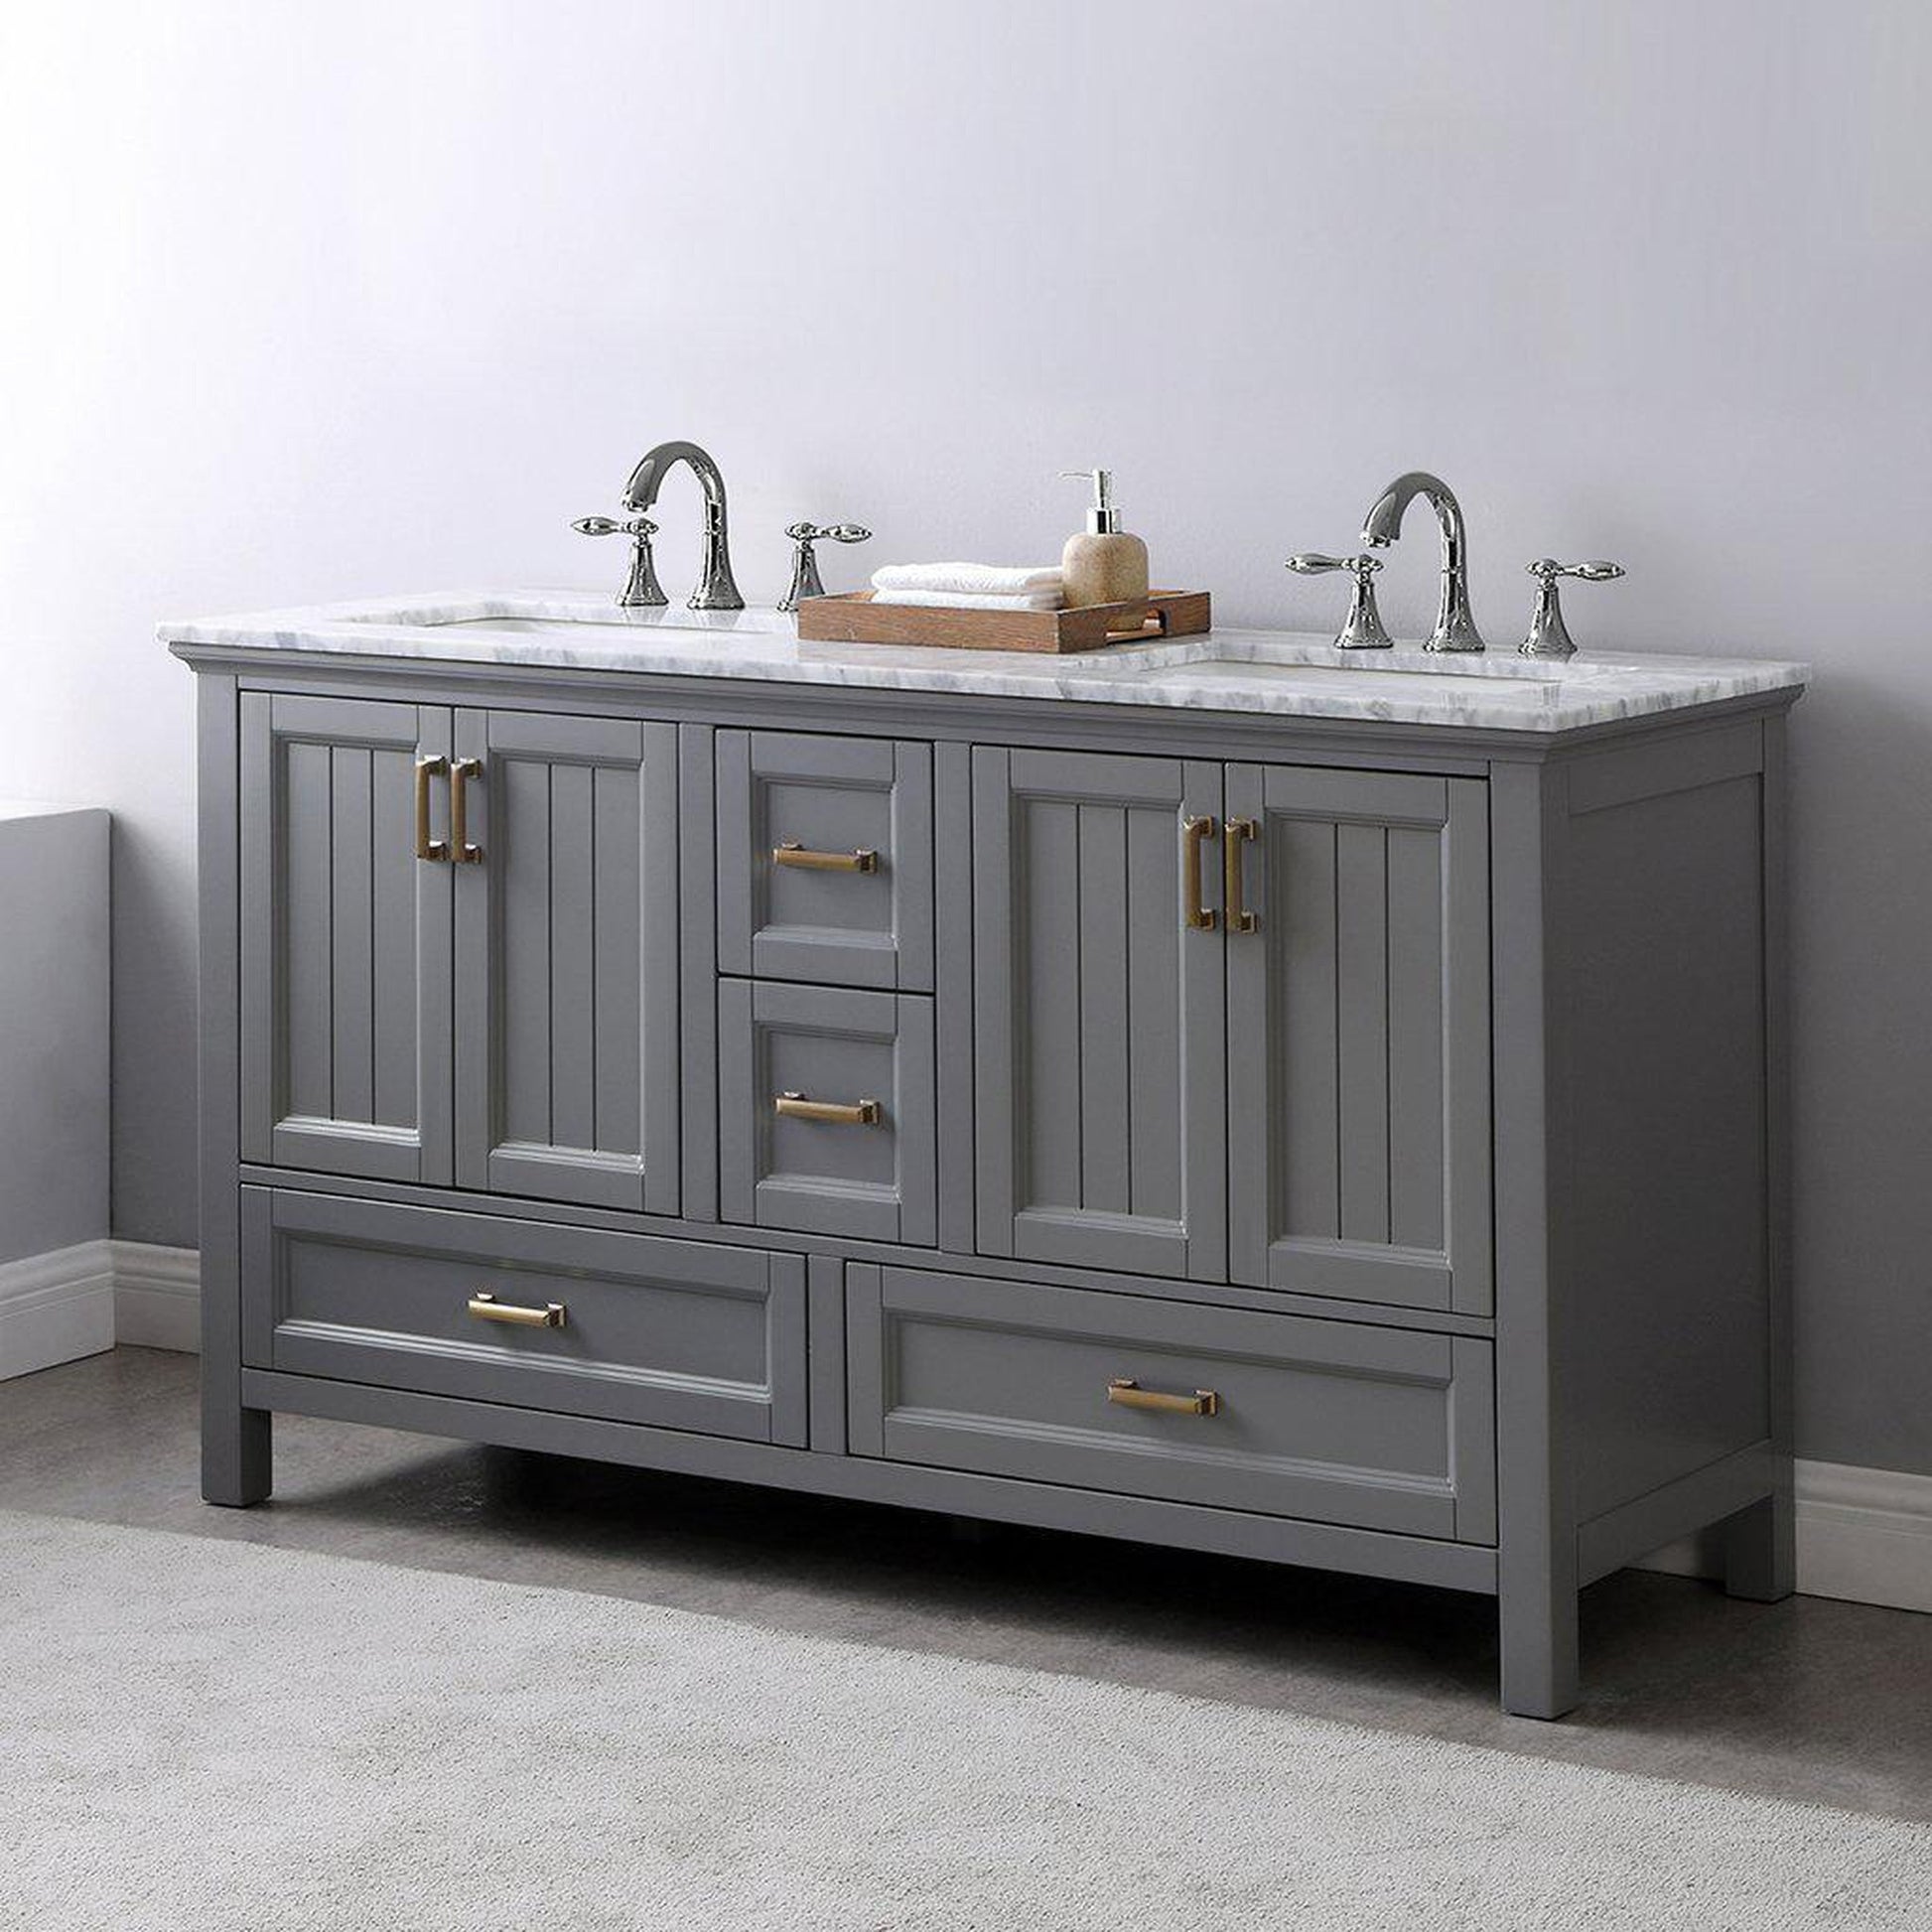 Altair Isla 60" Double Gray Freestanding Bathroom Vanity Set With Natural Carrara White Marble Top, Two Rectangular Undermount Ceramic Sinks, and Overflow